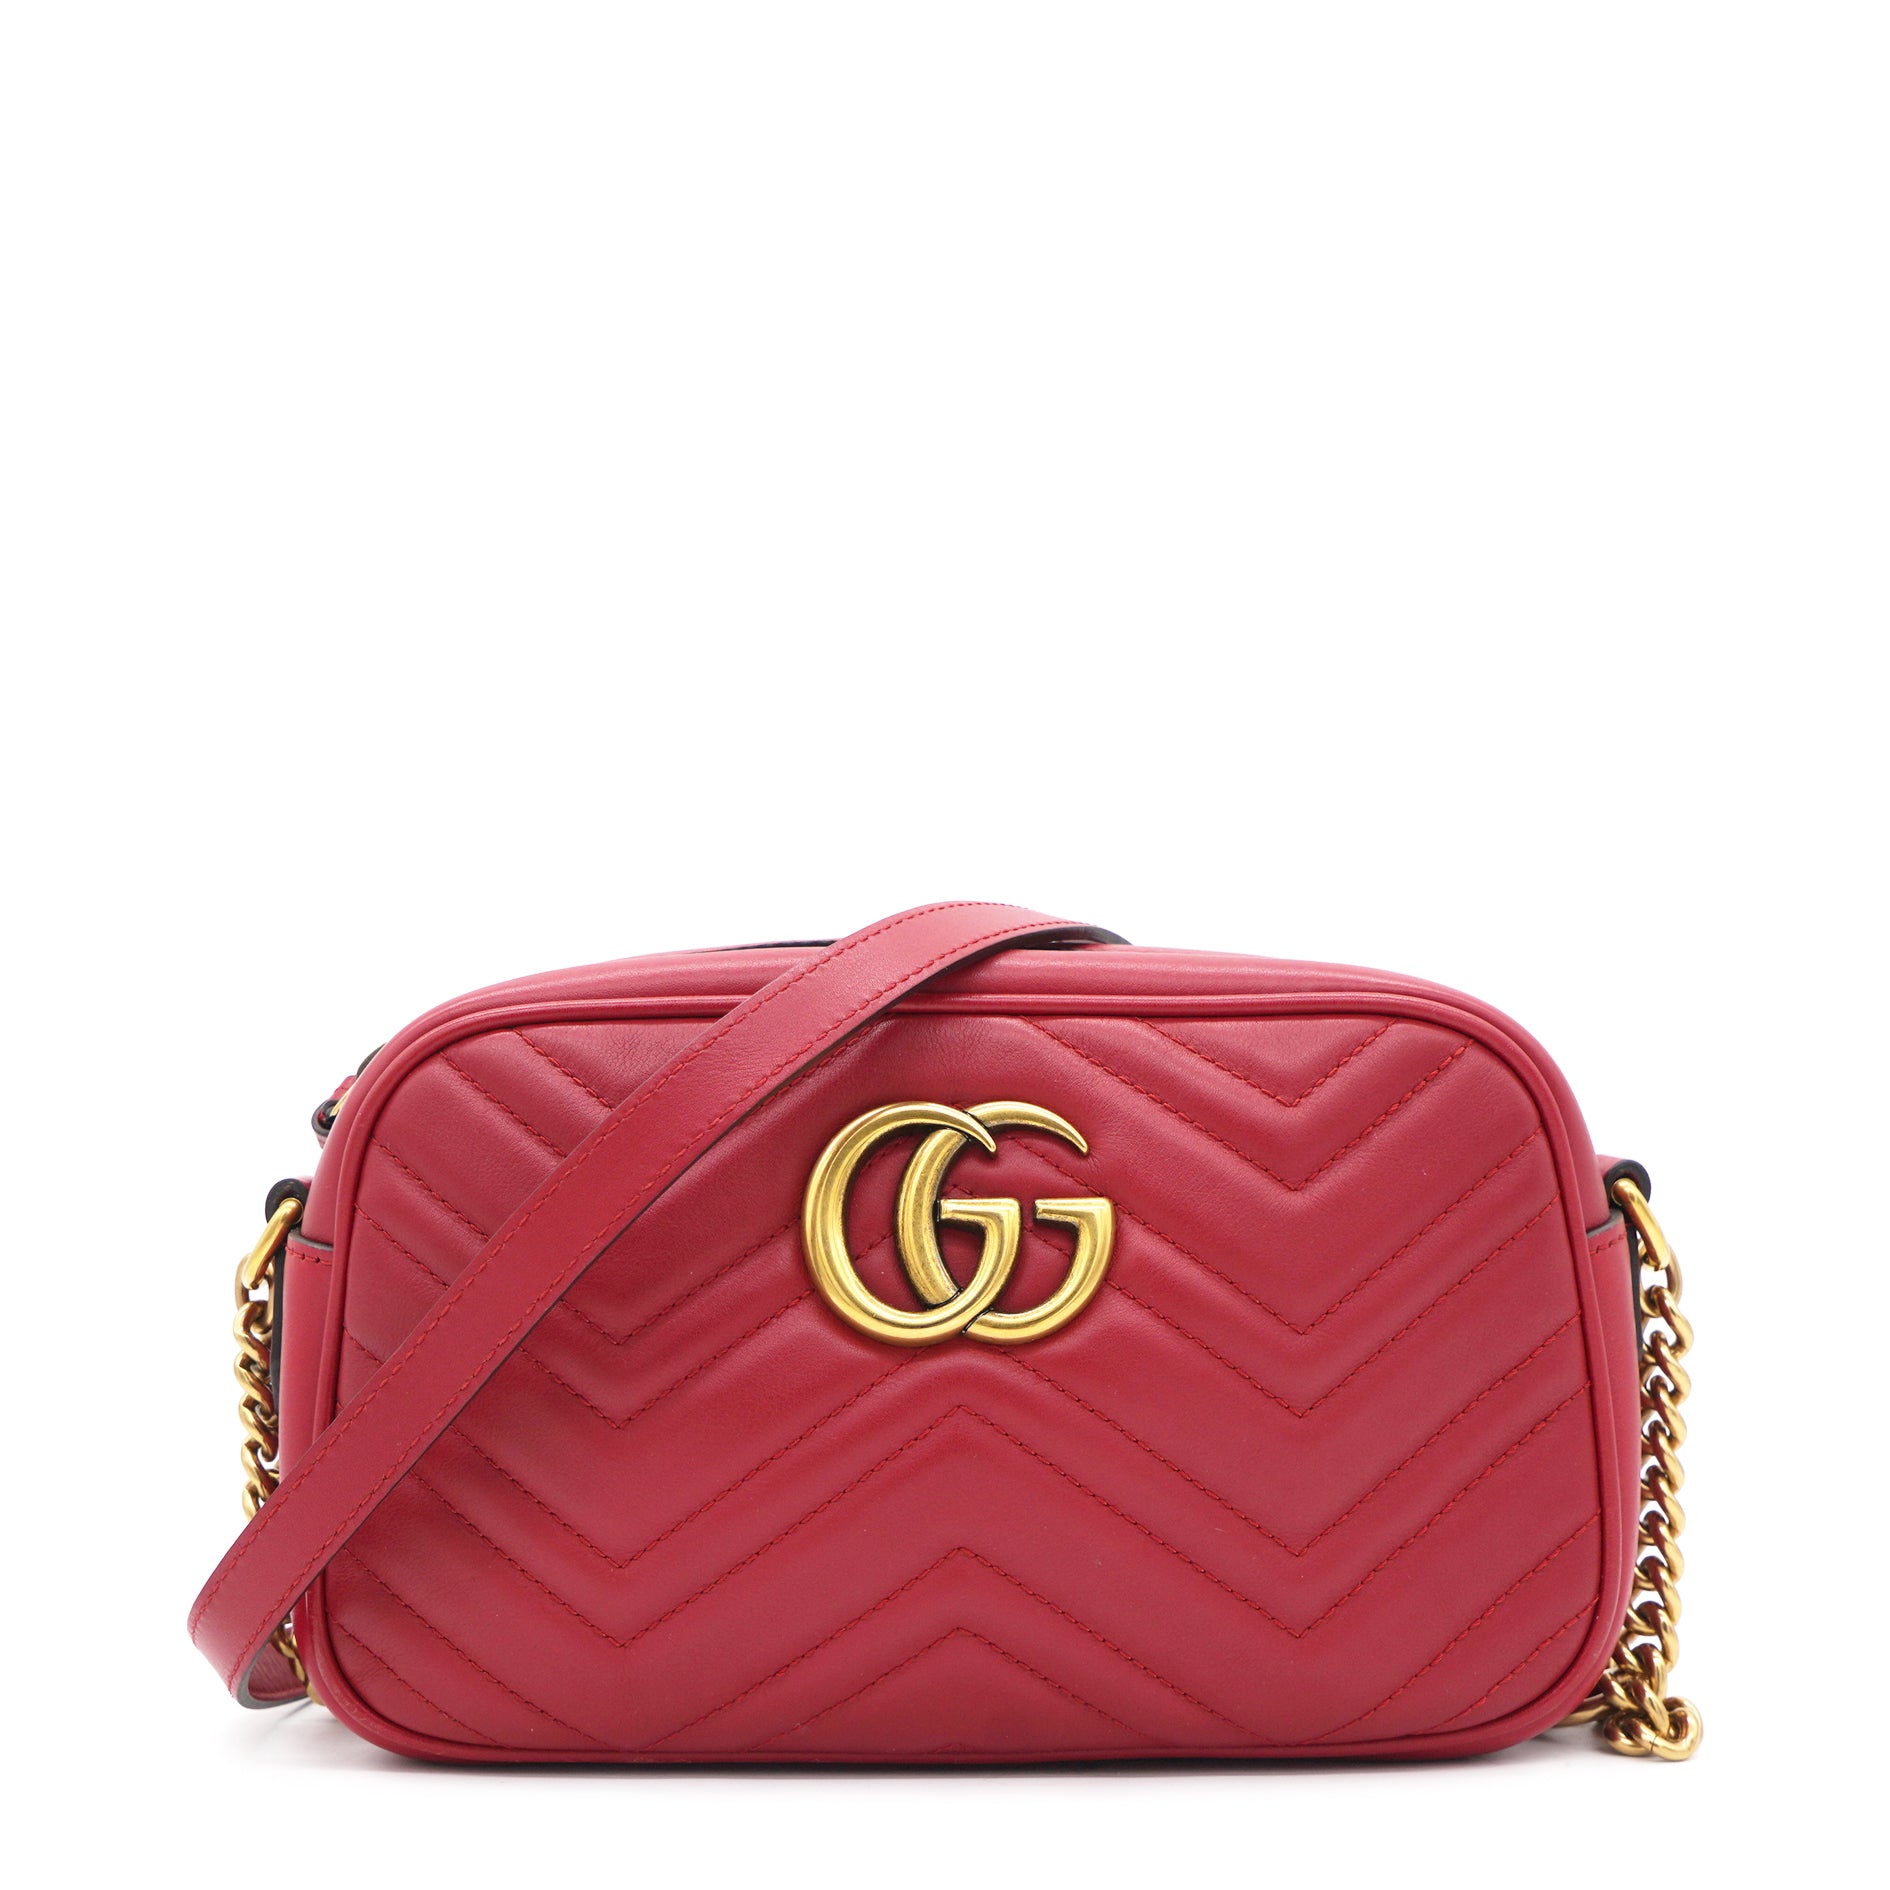 Small GG Marmont red bag